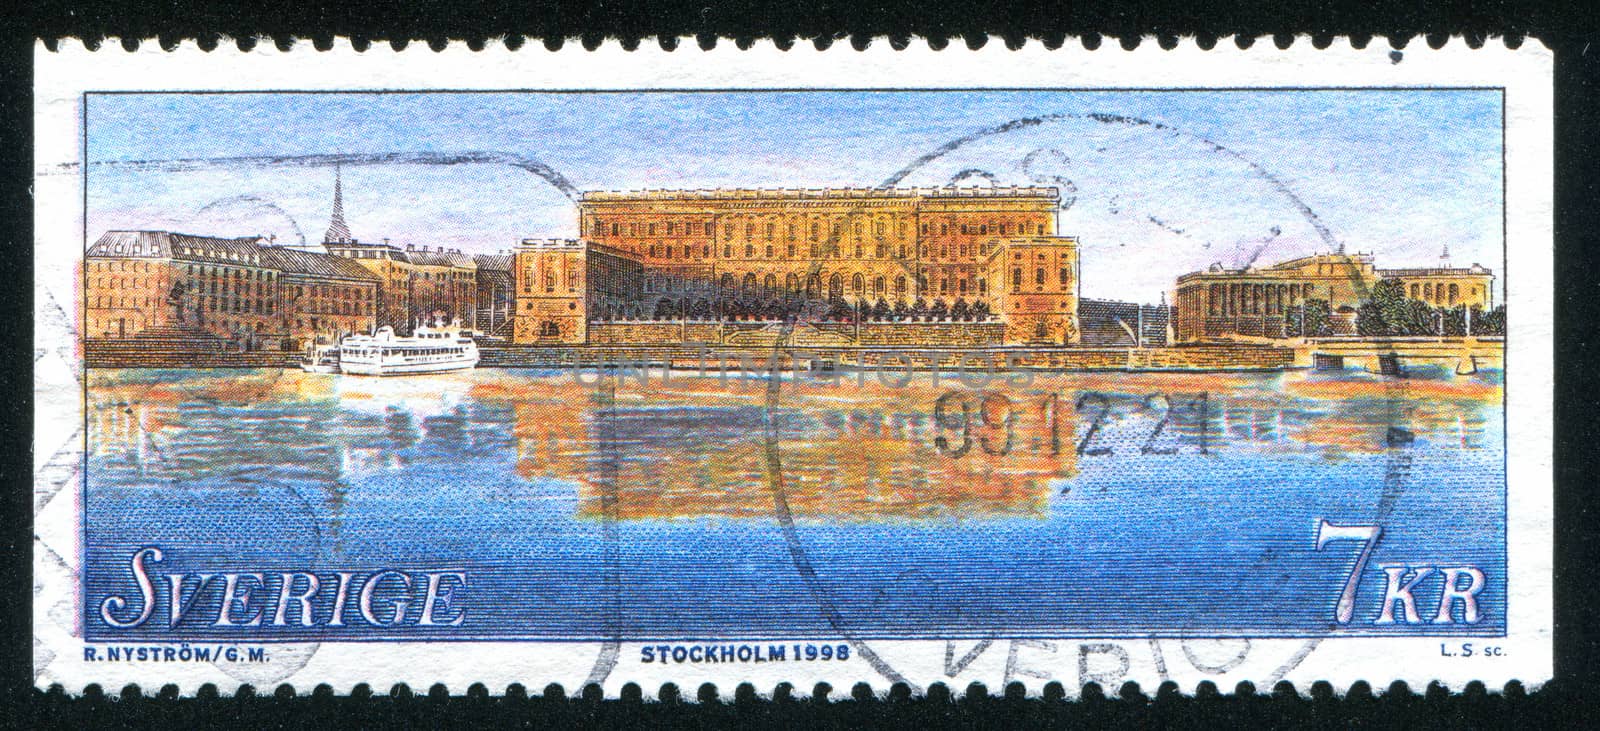 Stockholm Palace by rook